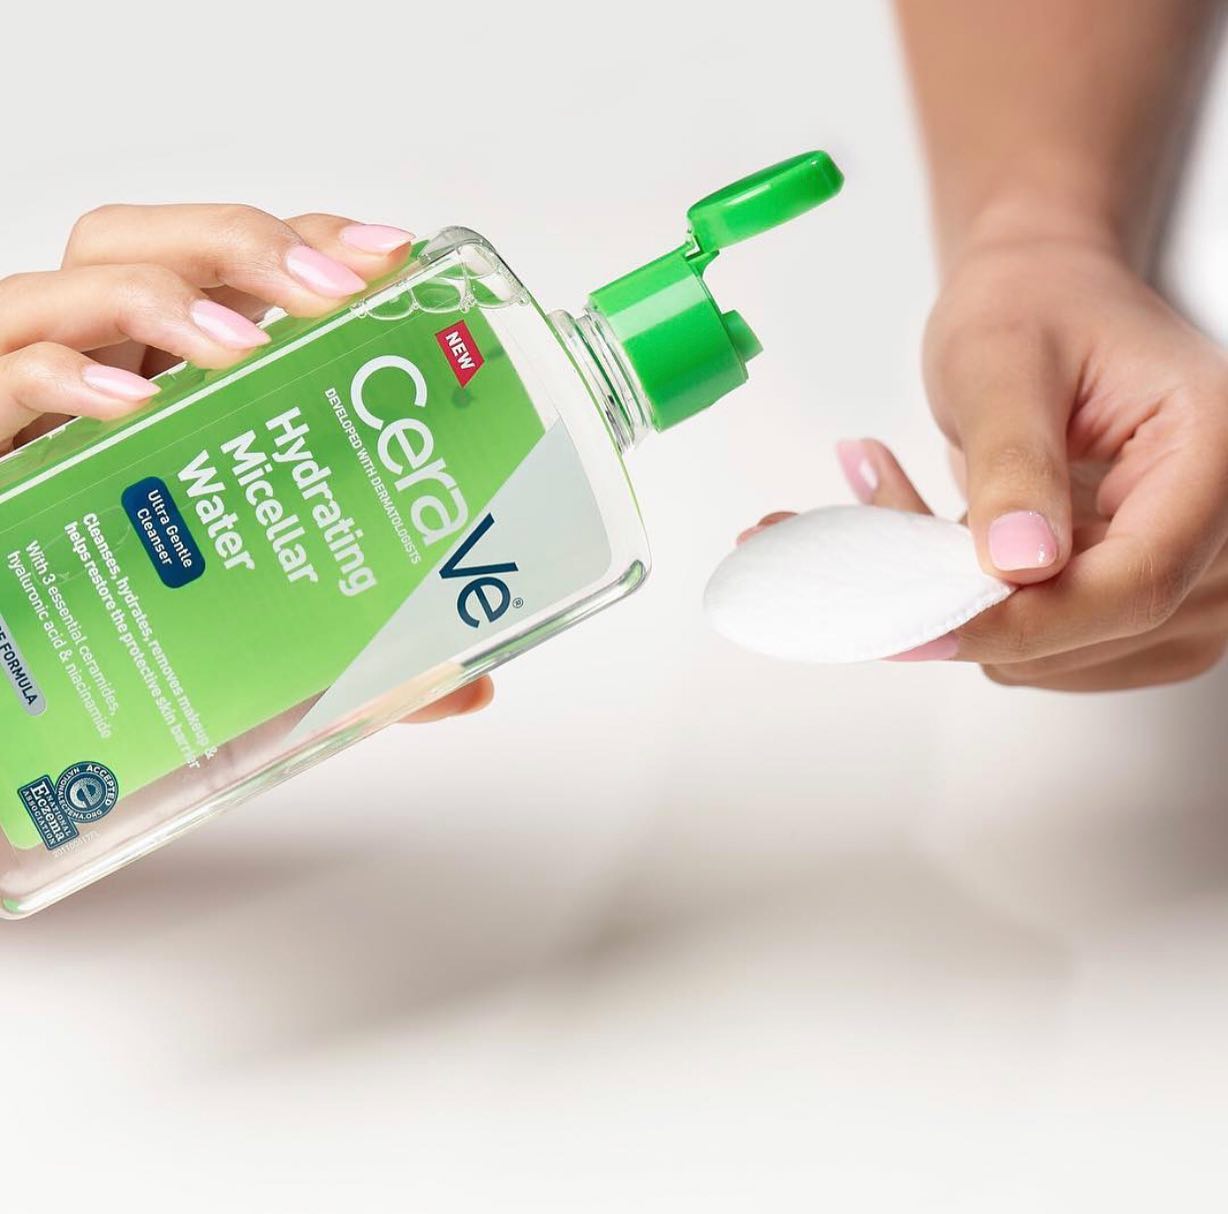 CeraVe Micellar Water with Cotton Pad